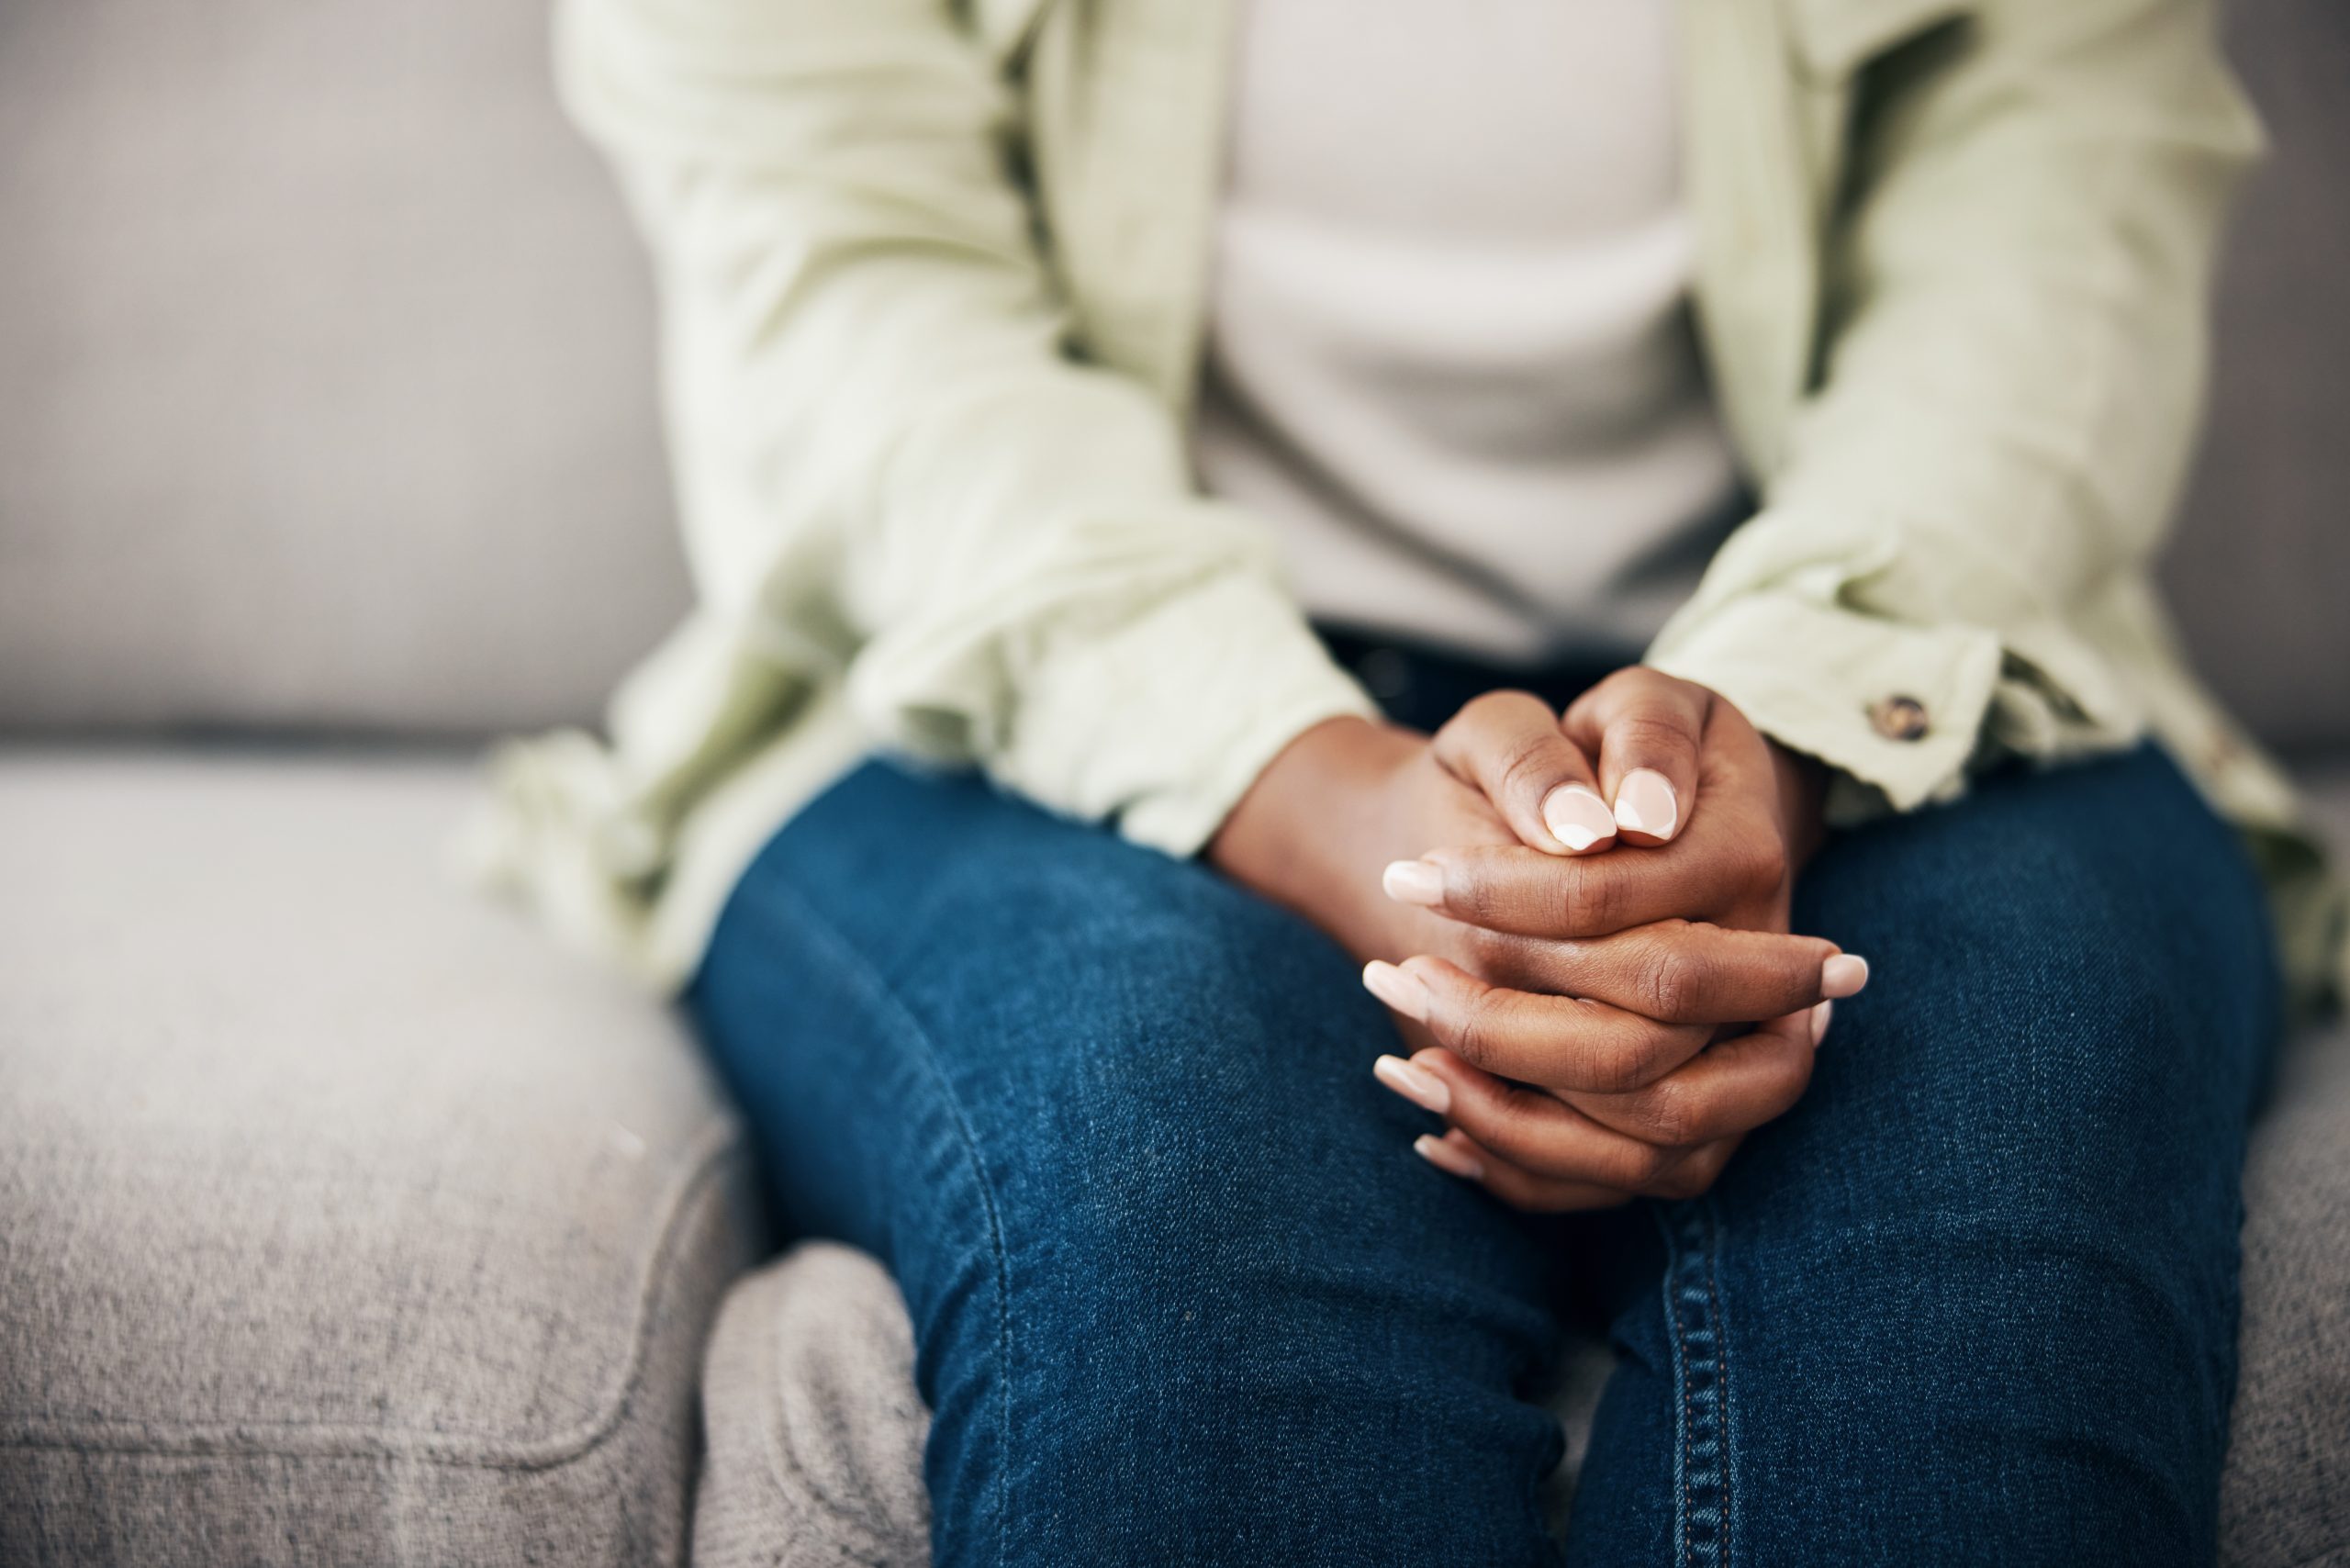 Anxiety, hands and woman on a sofa with stress, fear or worry for mental health or domestic abuse in her home. Psychology, zoom and female with depression, bipolar or scared of gender based violence.